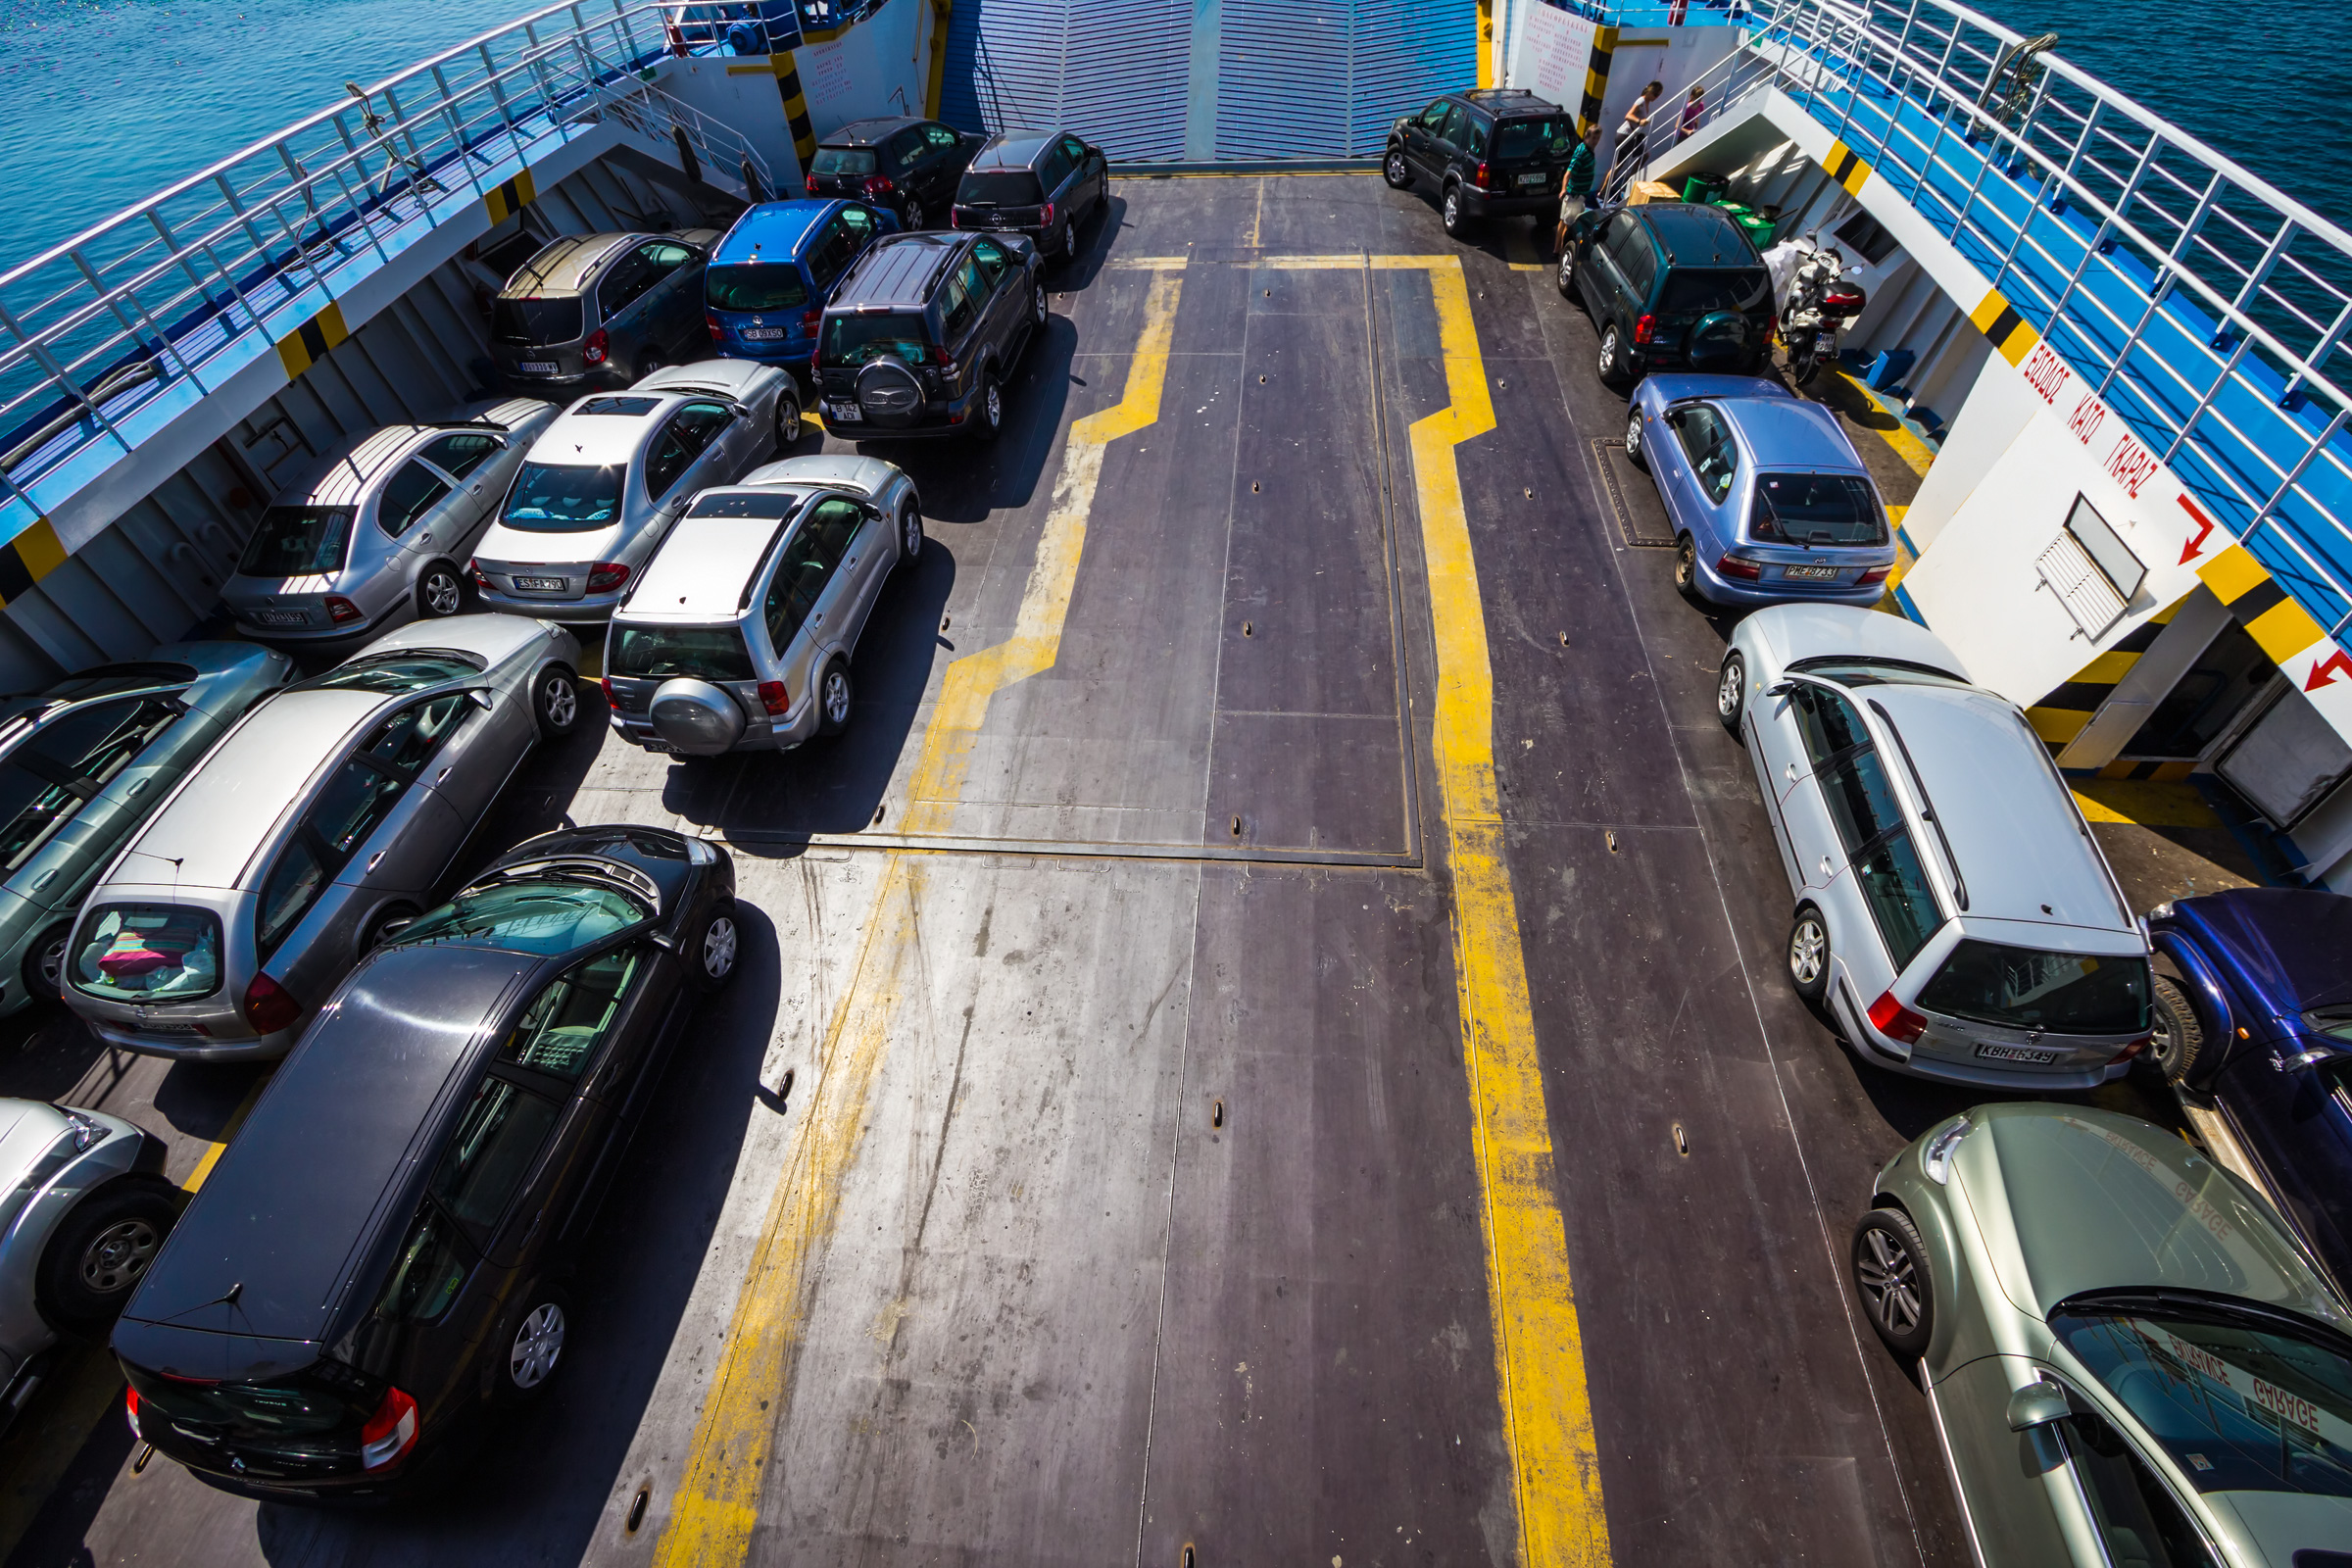 Cars on ferry - top view